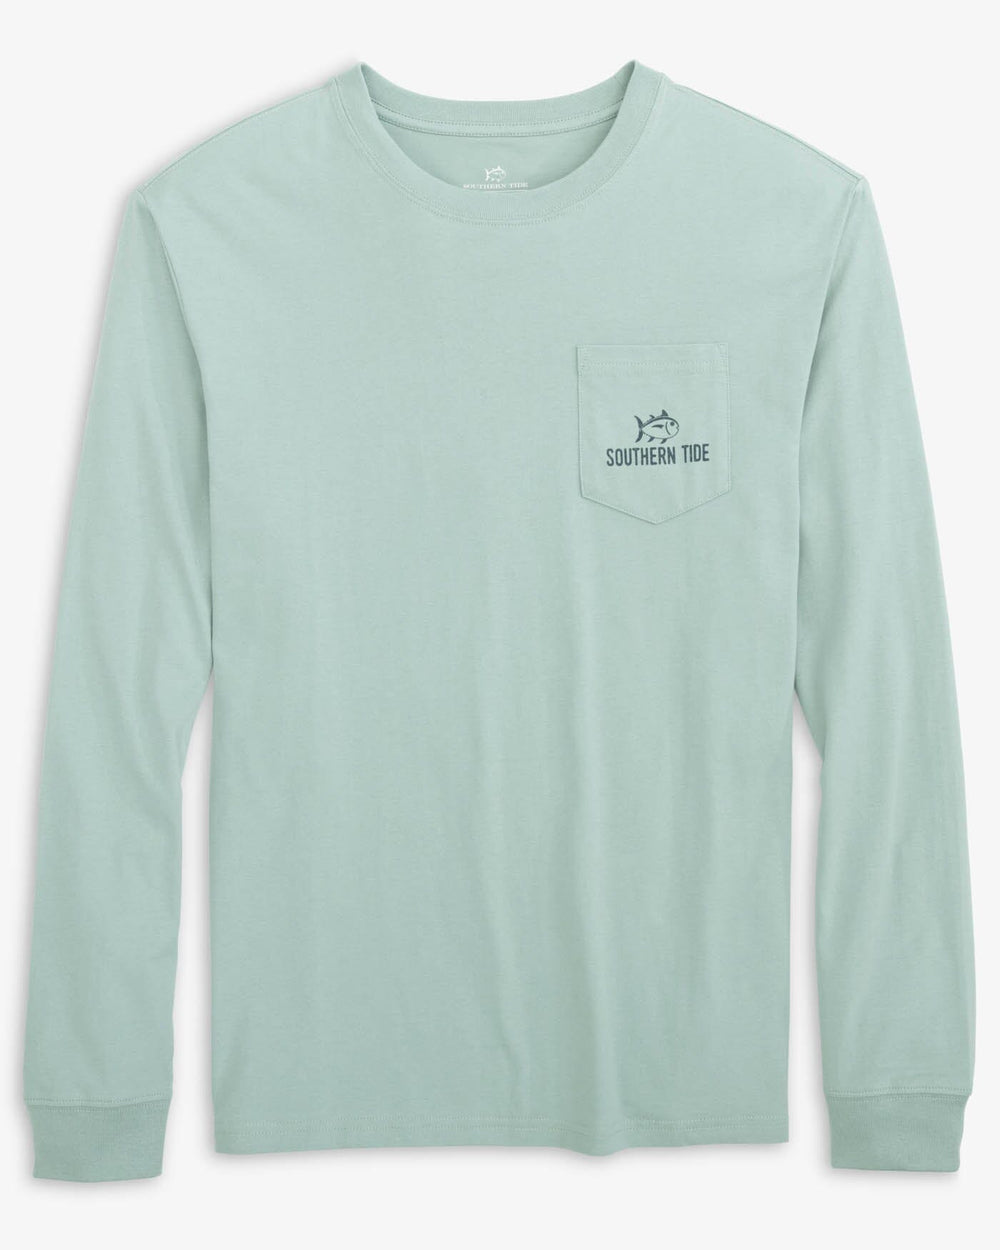 The front view of the Southern Tide Gradient Water Bottle Long Sleeve T-Shirt by Southern Tide - Sawgrass Green